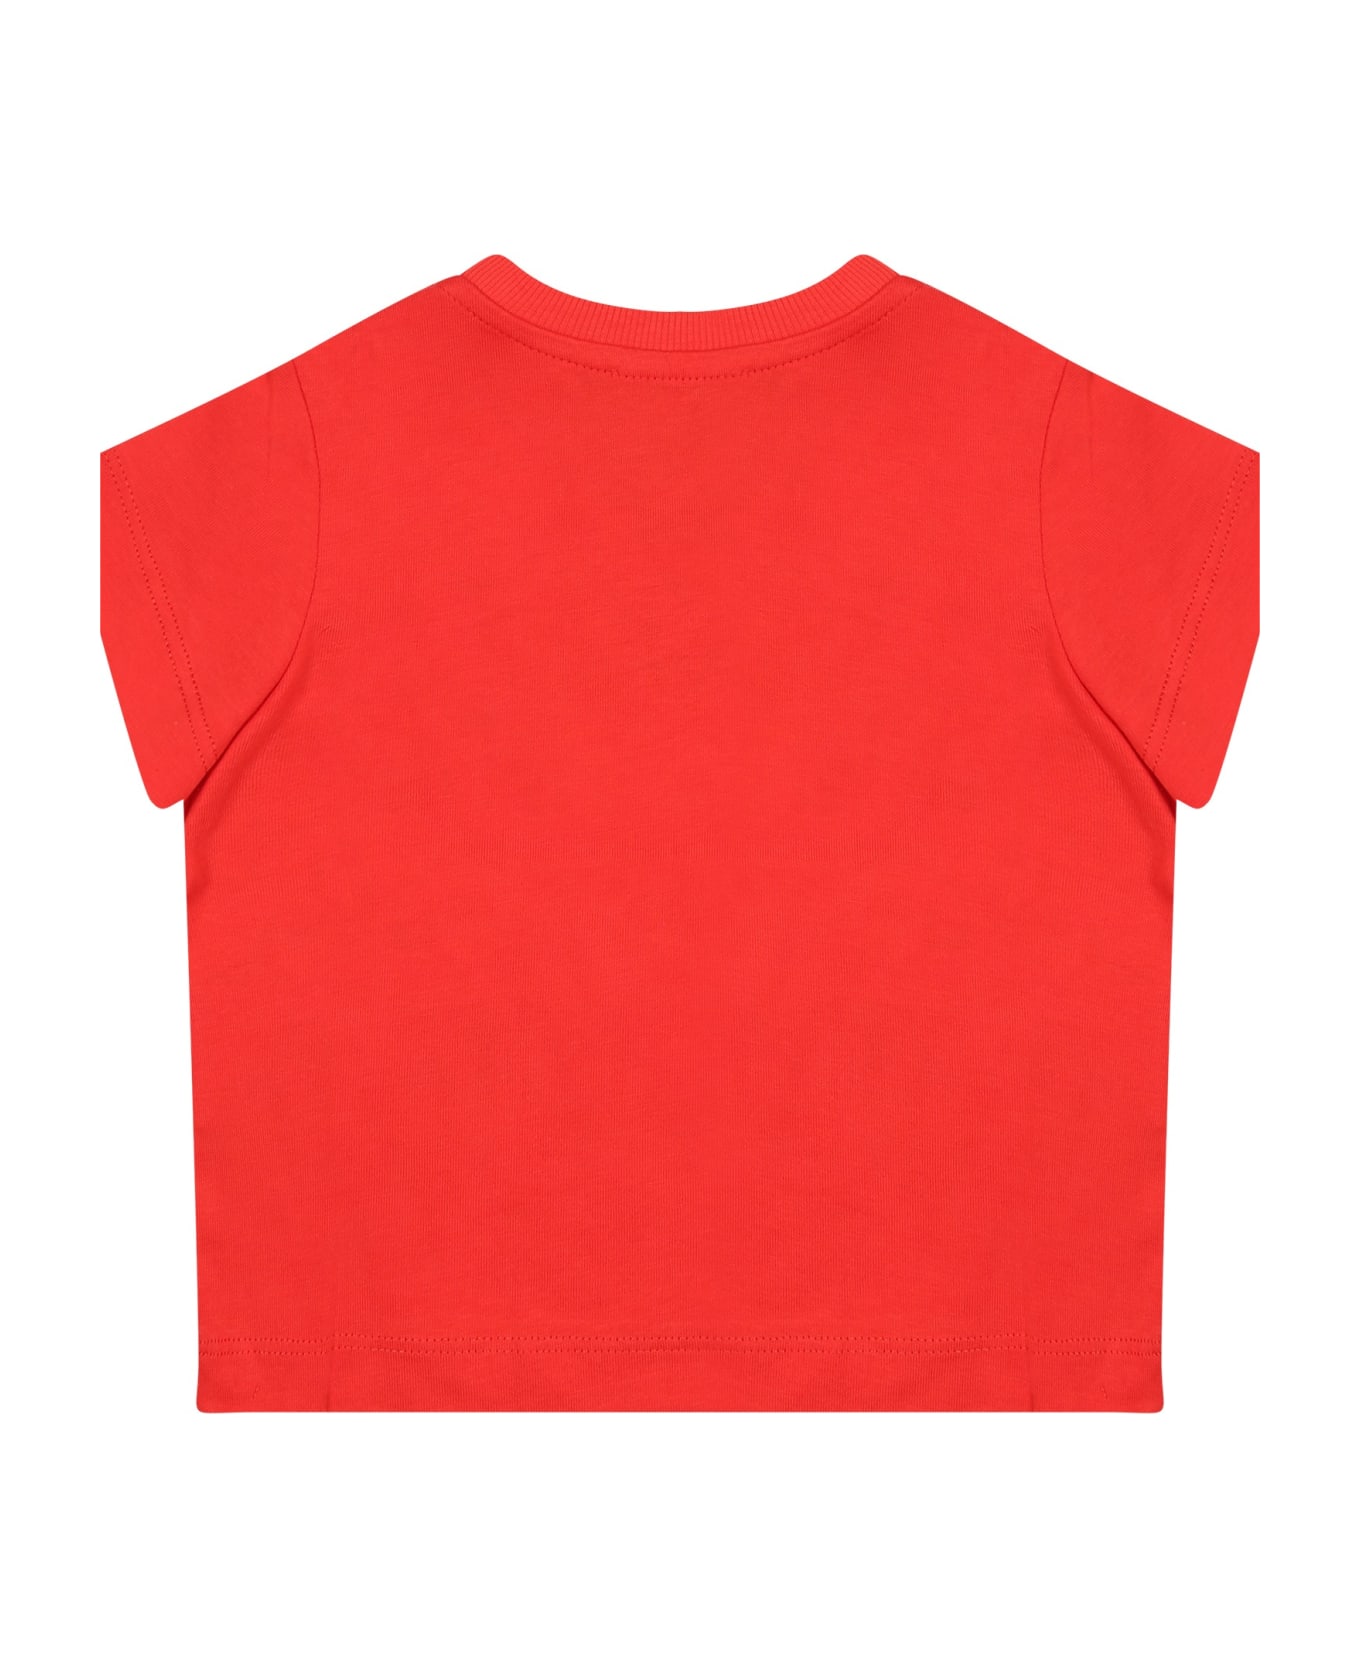 Moschino Red T-shirt For Babies With Logo - Red